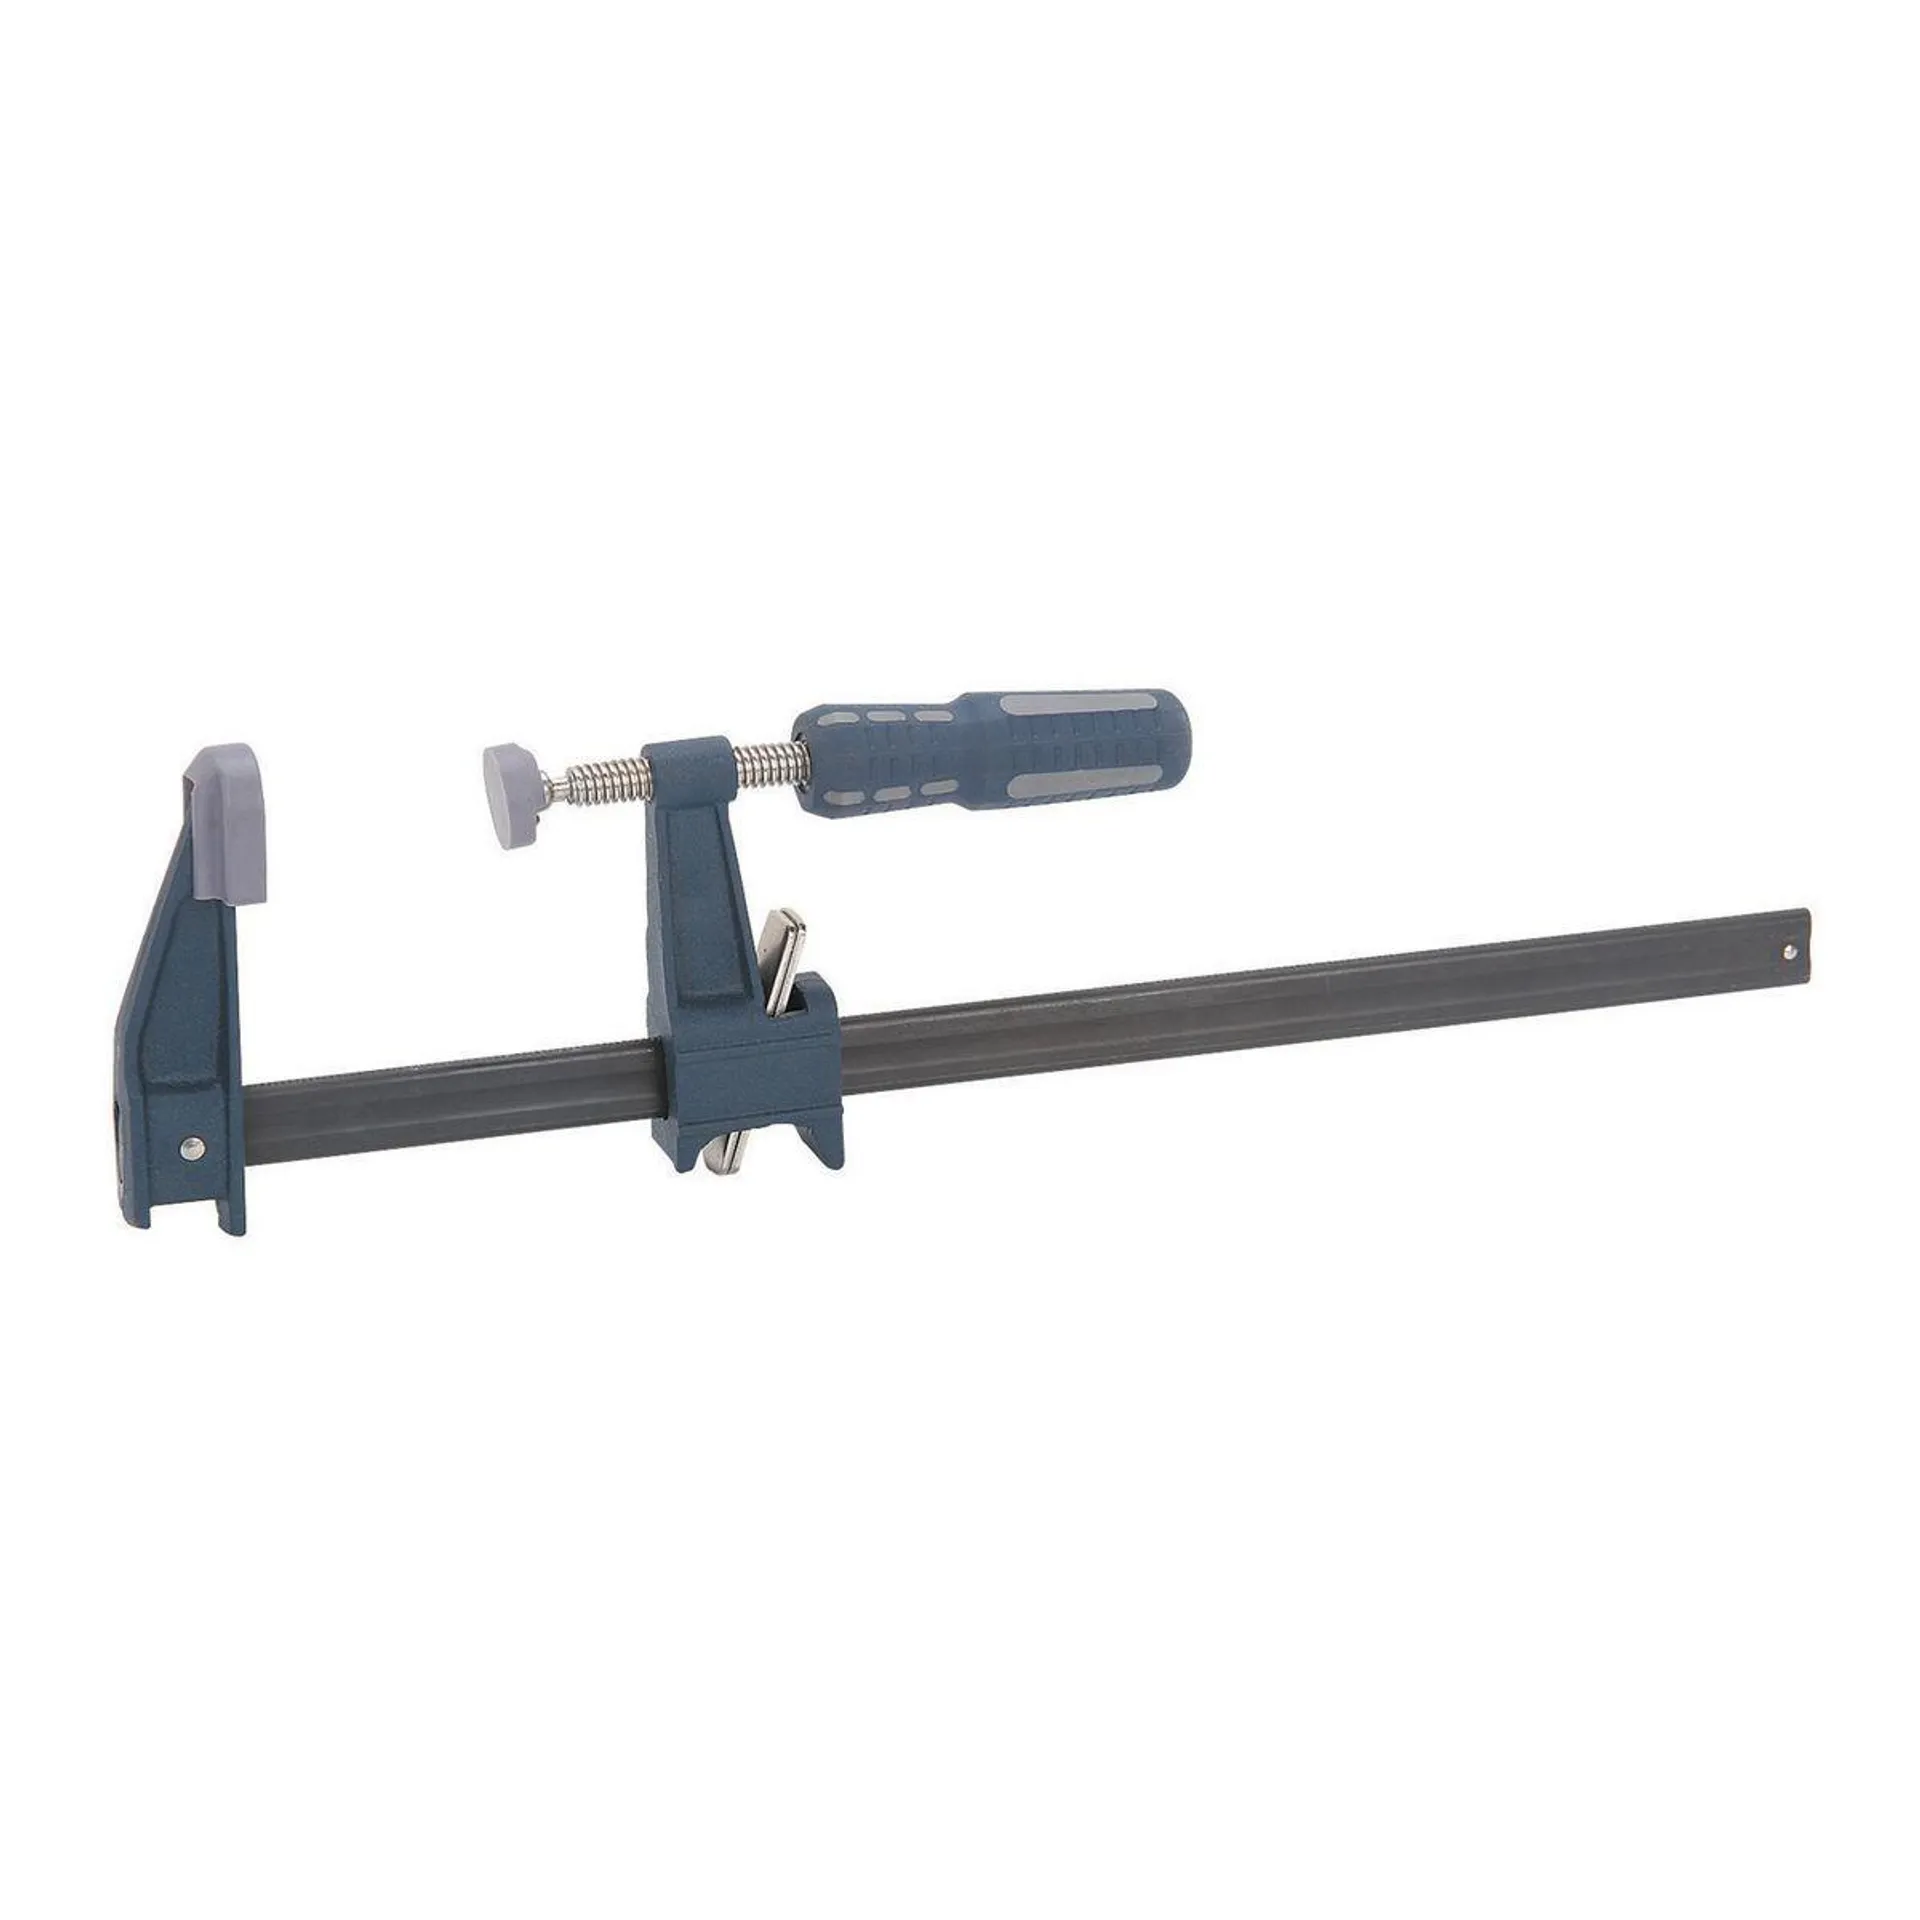 PITTSBURGH 12 in. Quick Release Bar Clamp